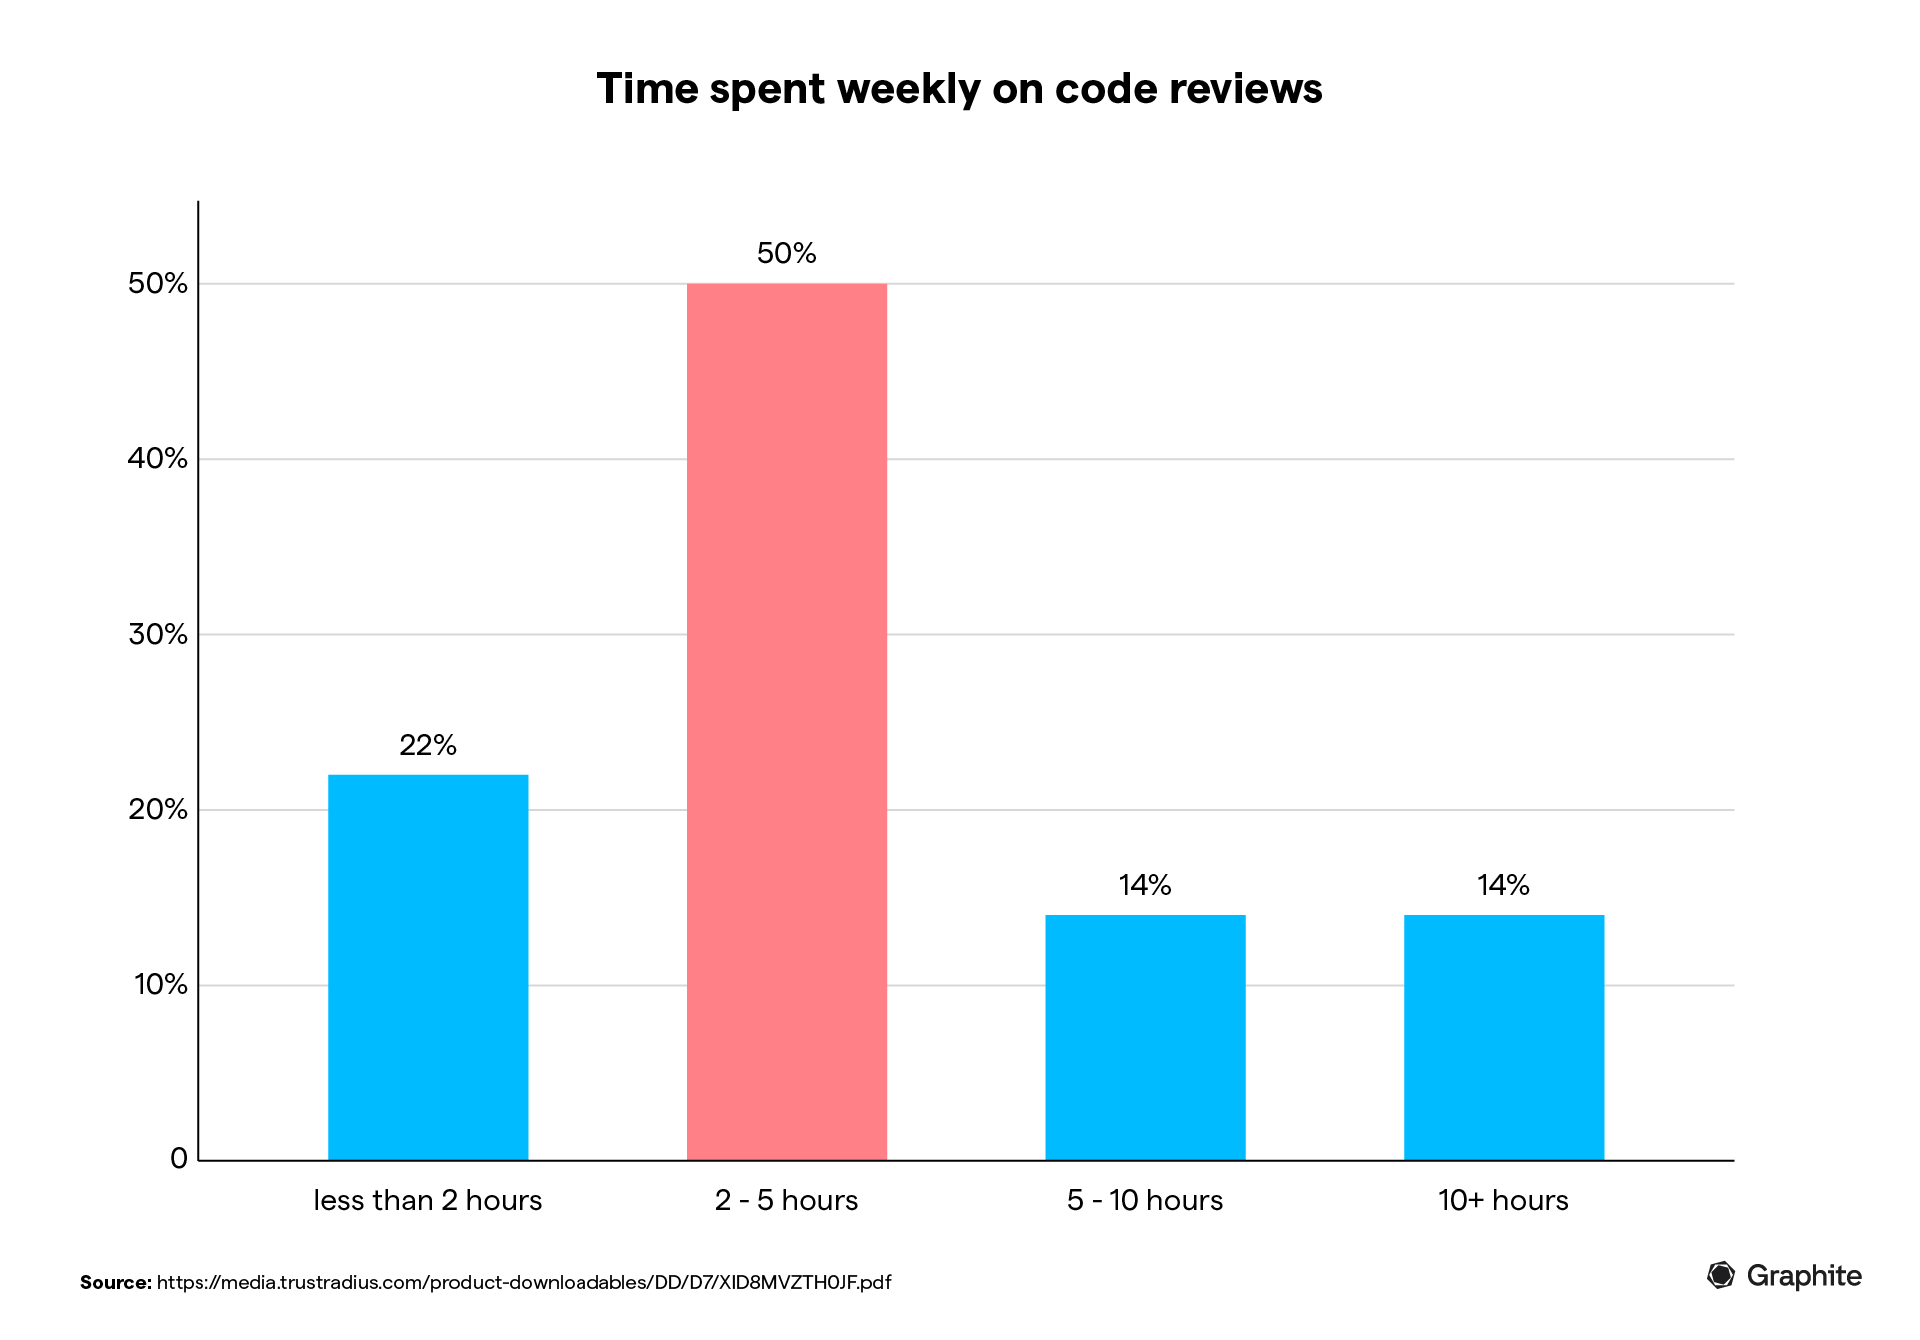 a bar chart showing time spent weekly on code reviews by development teams. 50% of development teams spend an average of 2-5 hours weekly on code reviews.